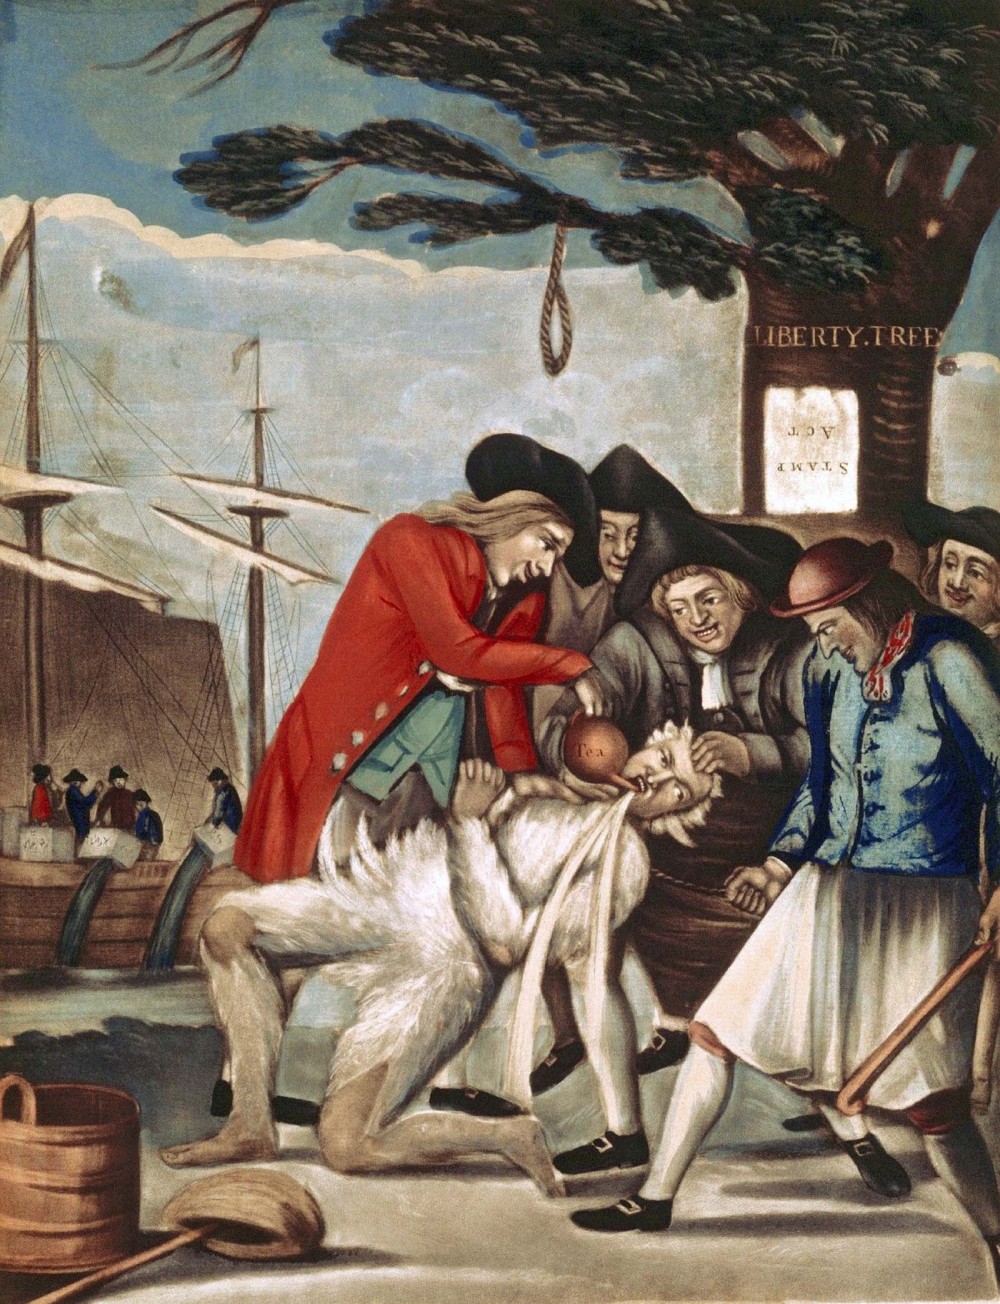 Members of the Sons of Liberty tarring and feathering a British Custom Commissioner.